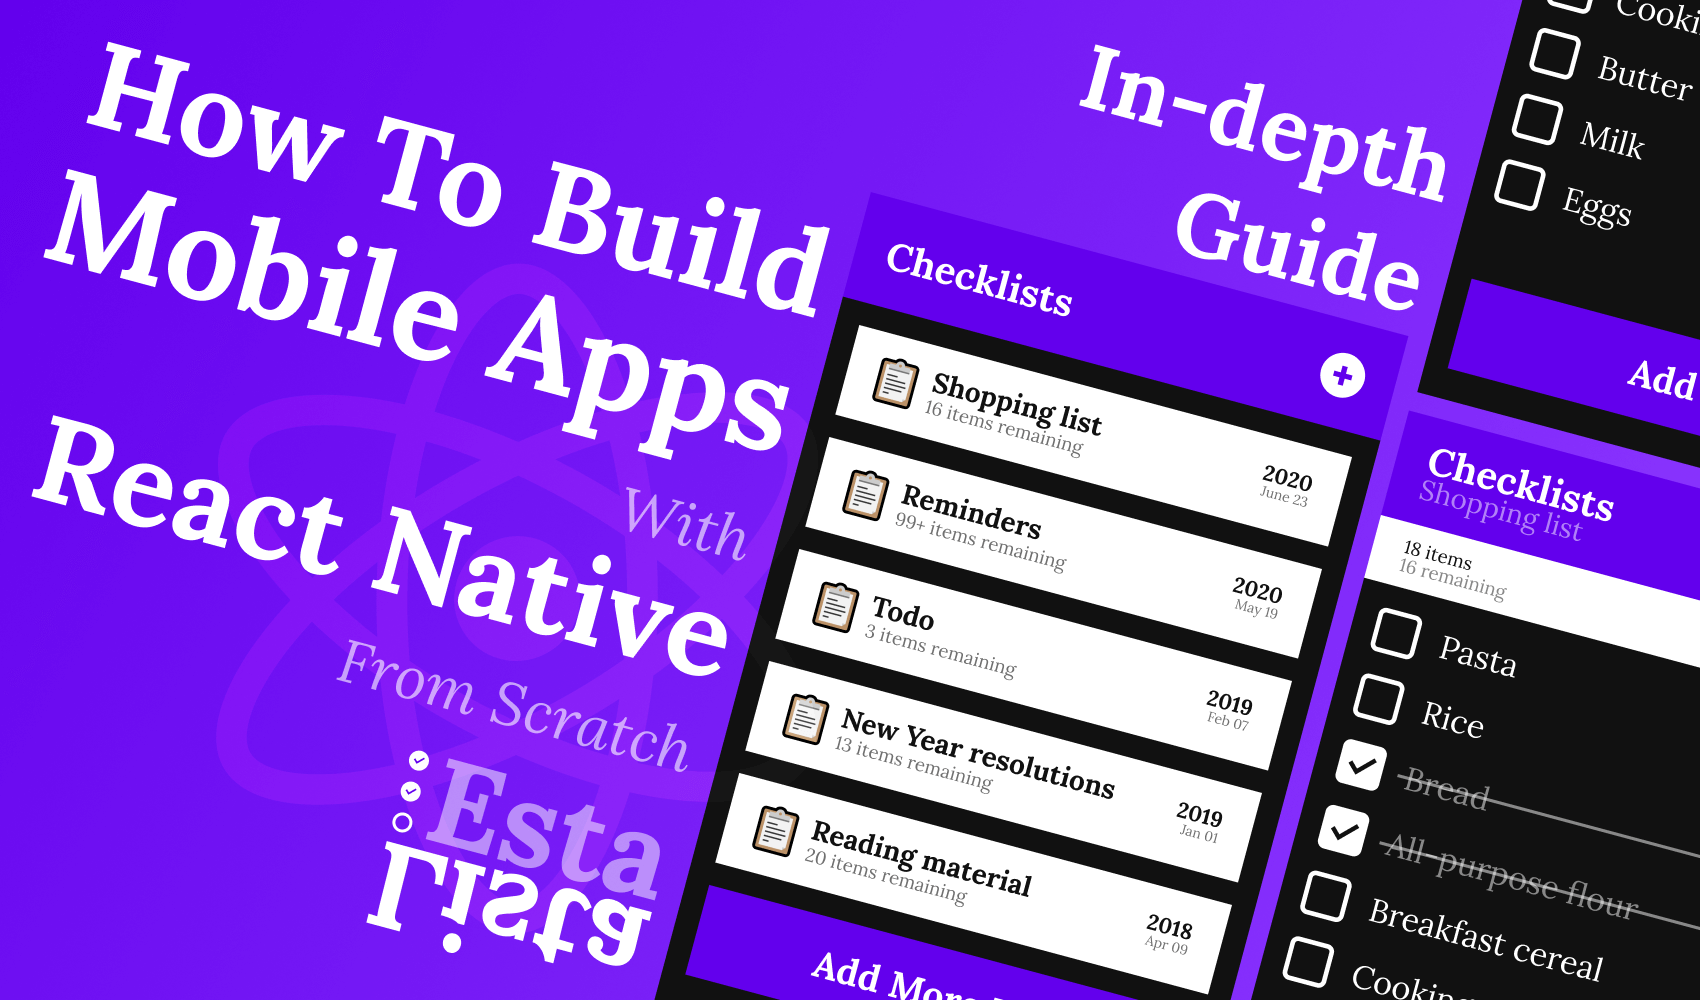 An In-depth Guide on How To Build Mobile Apps With React Native